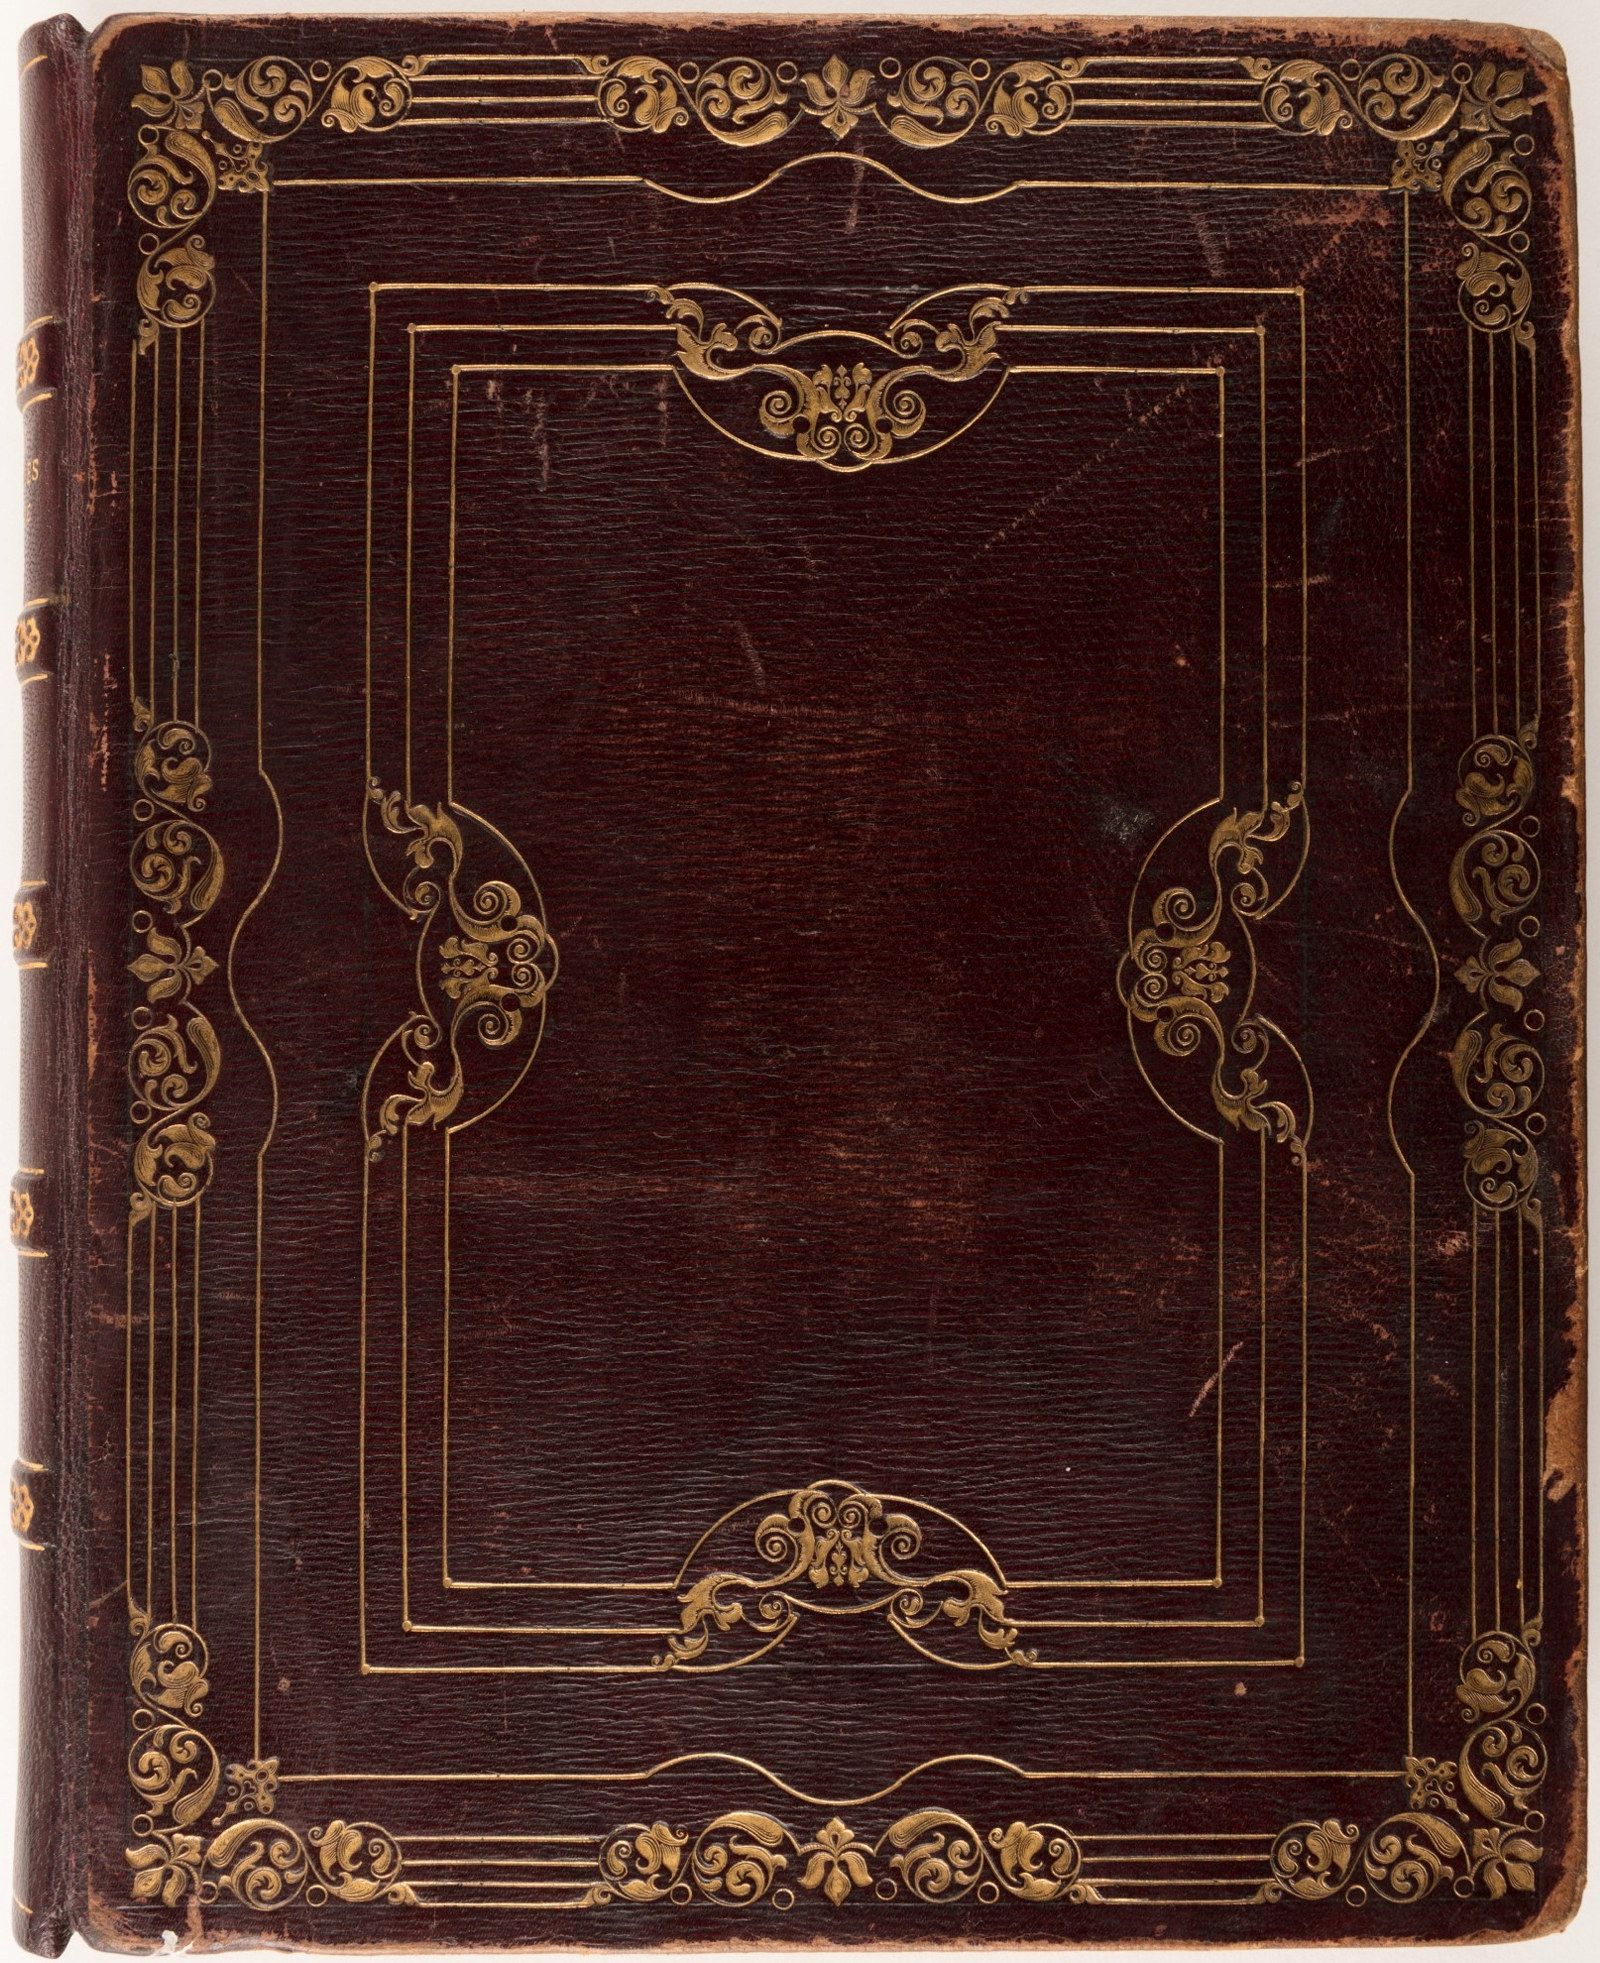 Leather bookcover